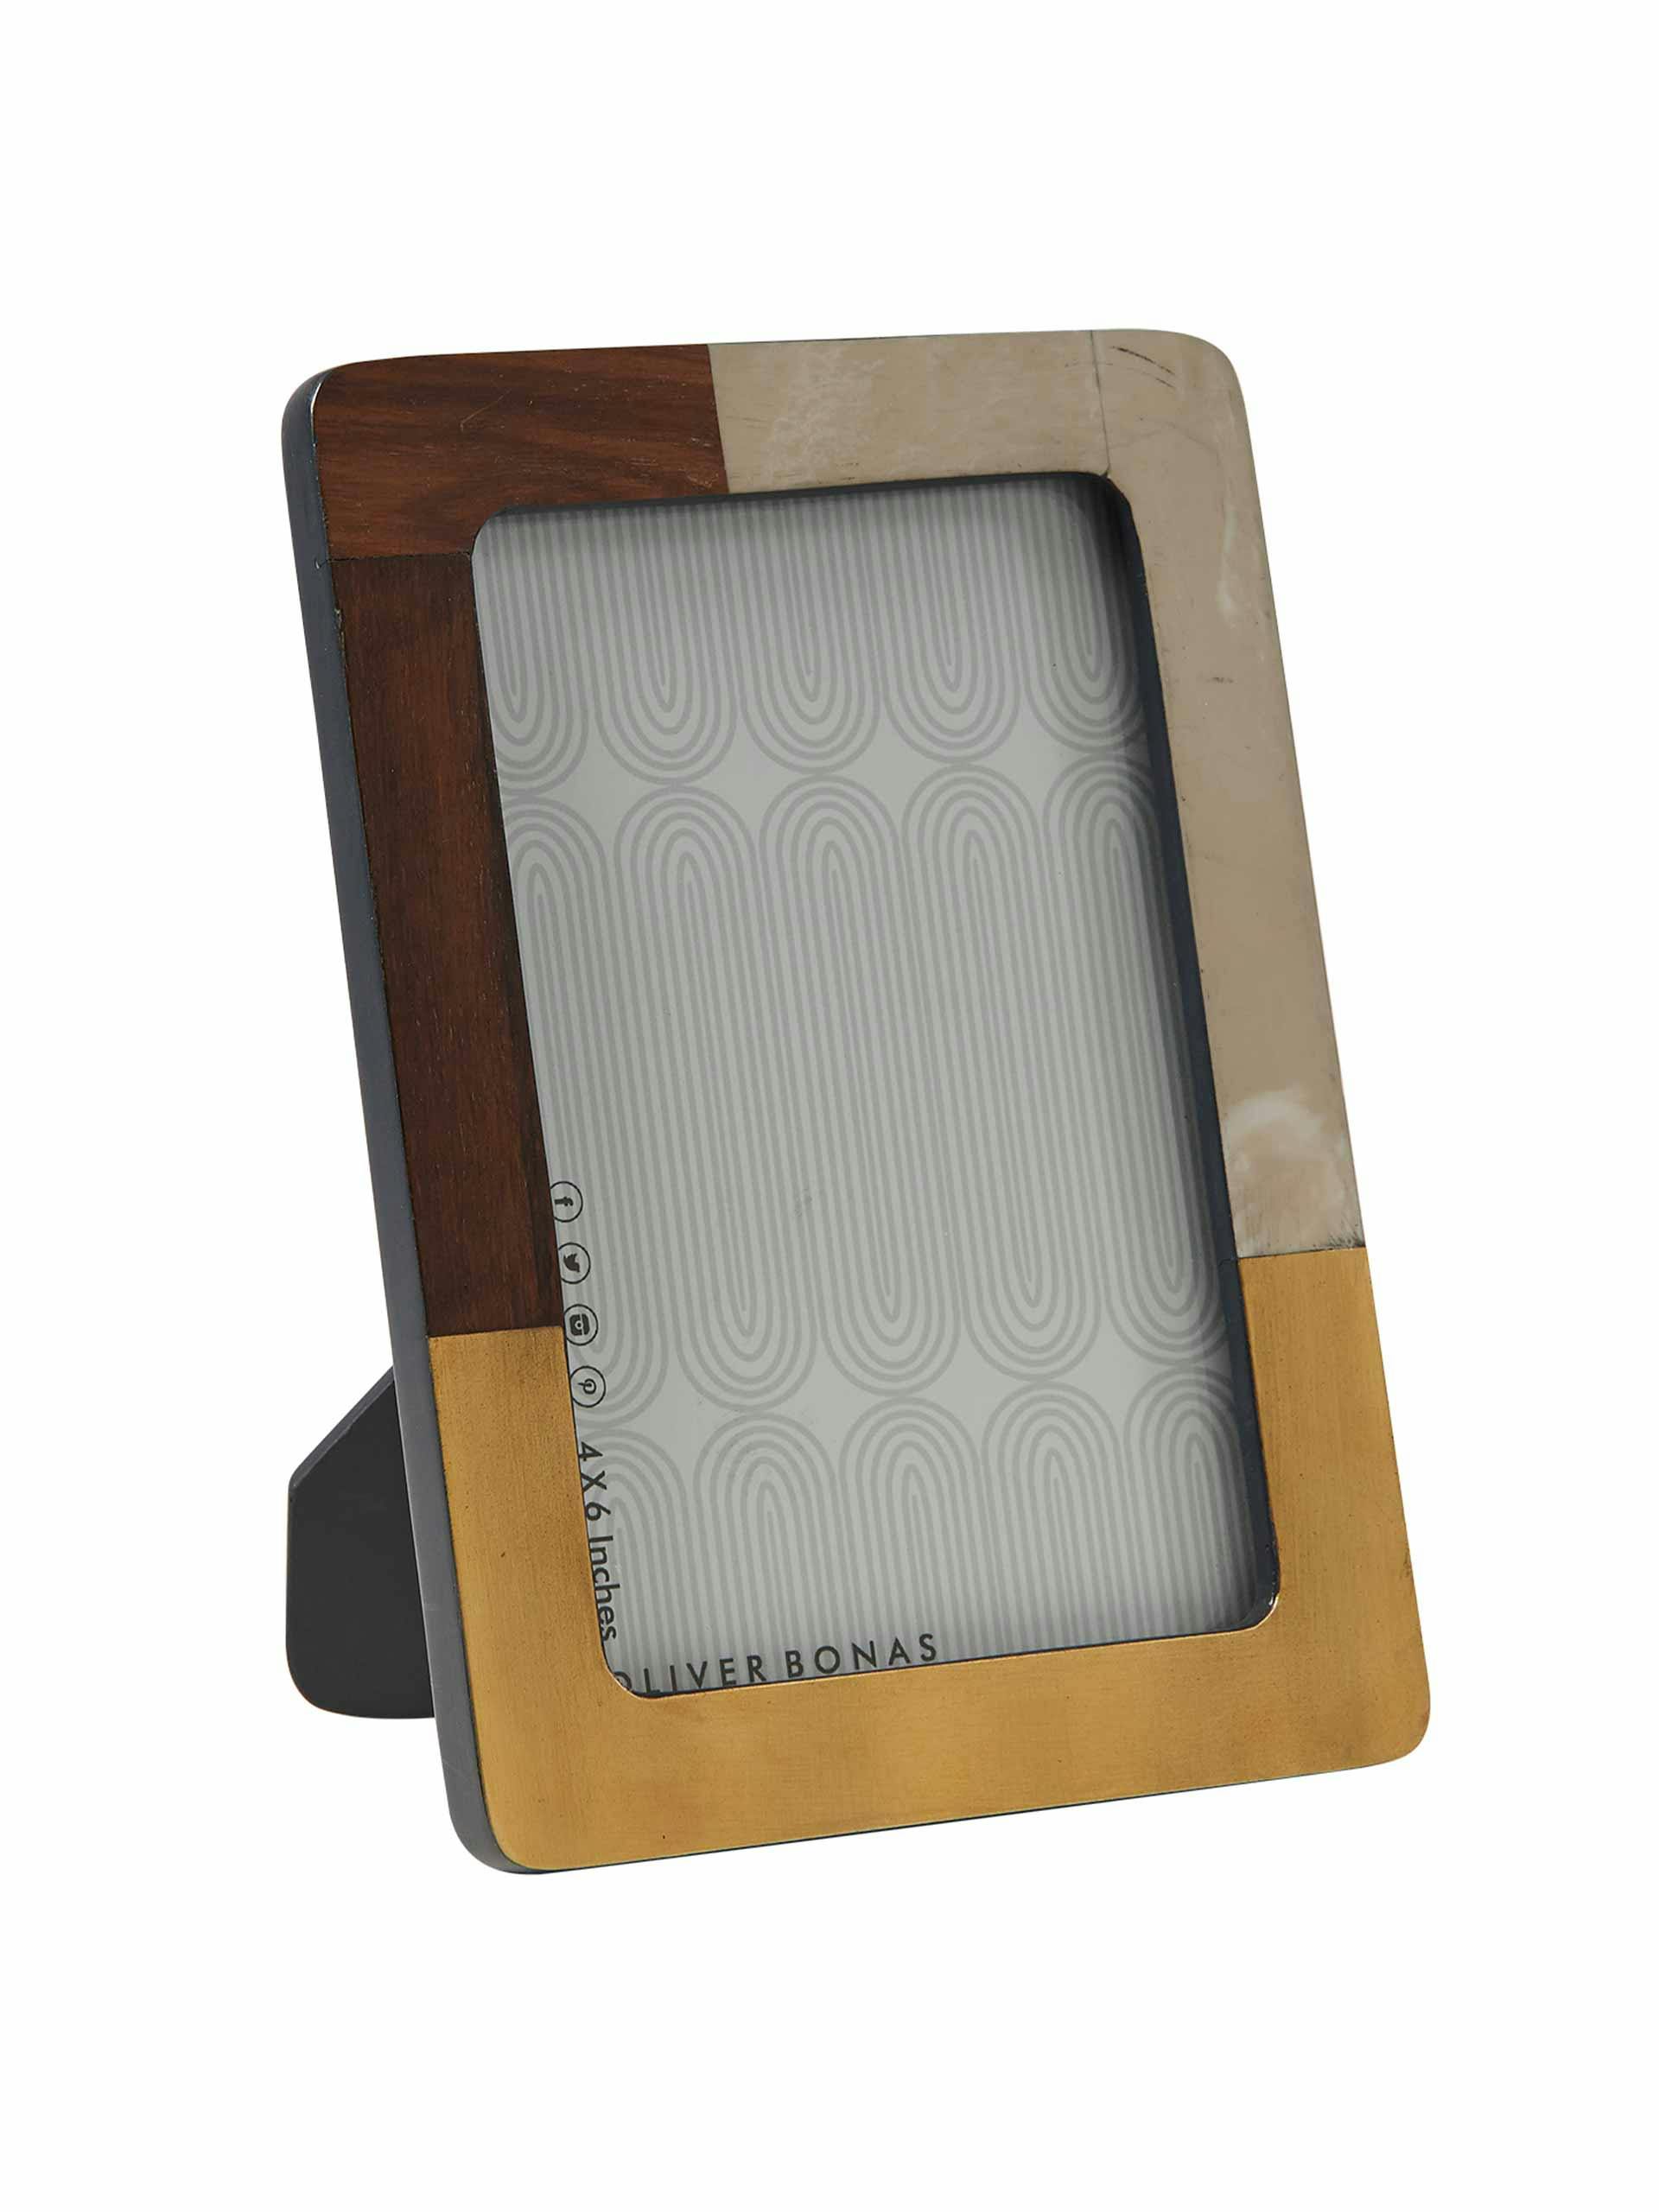 Pia gold and grey block photo frame